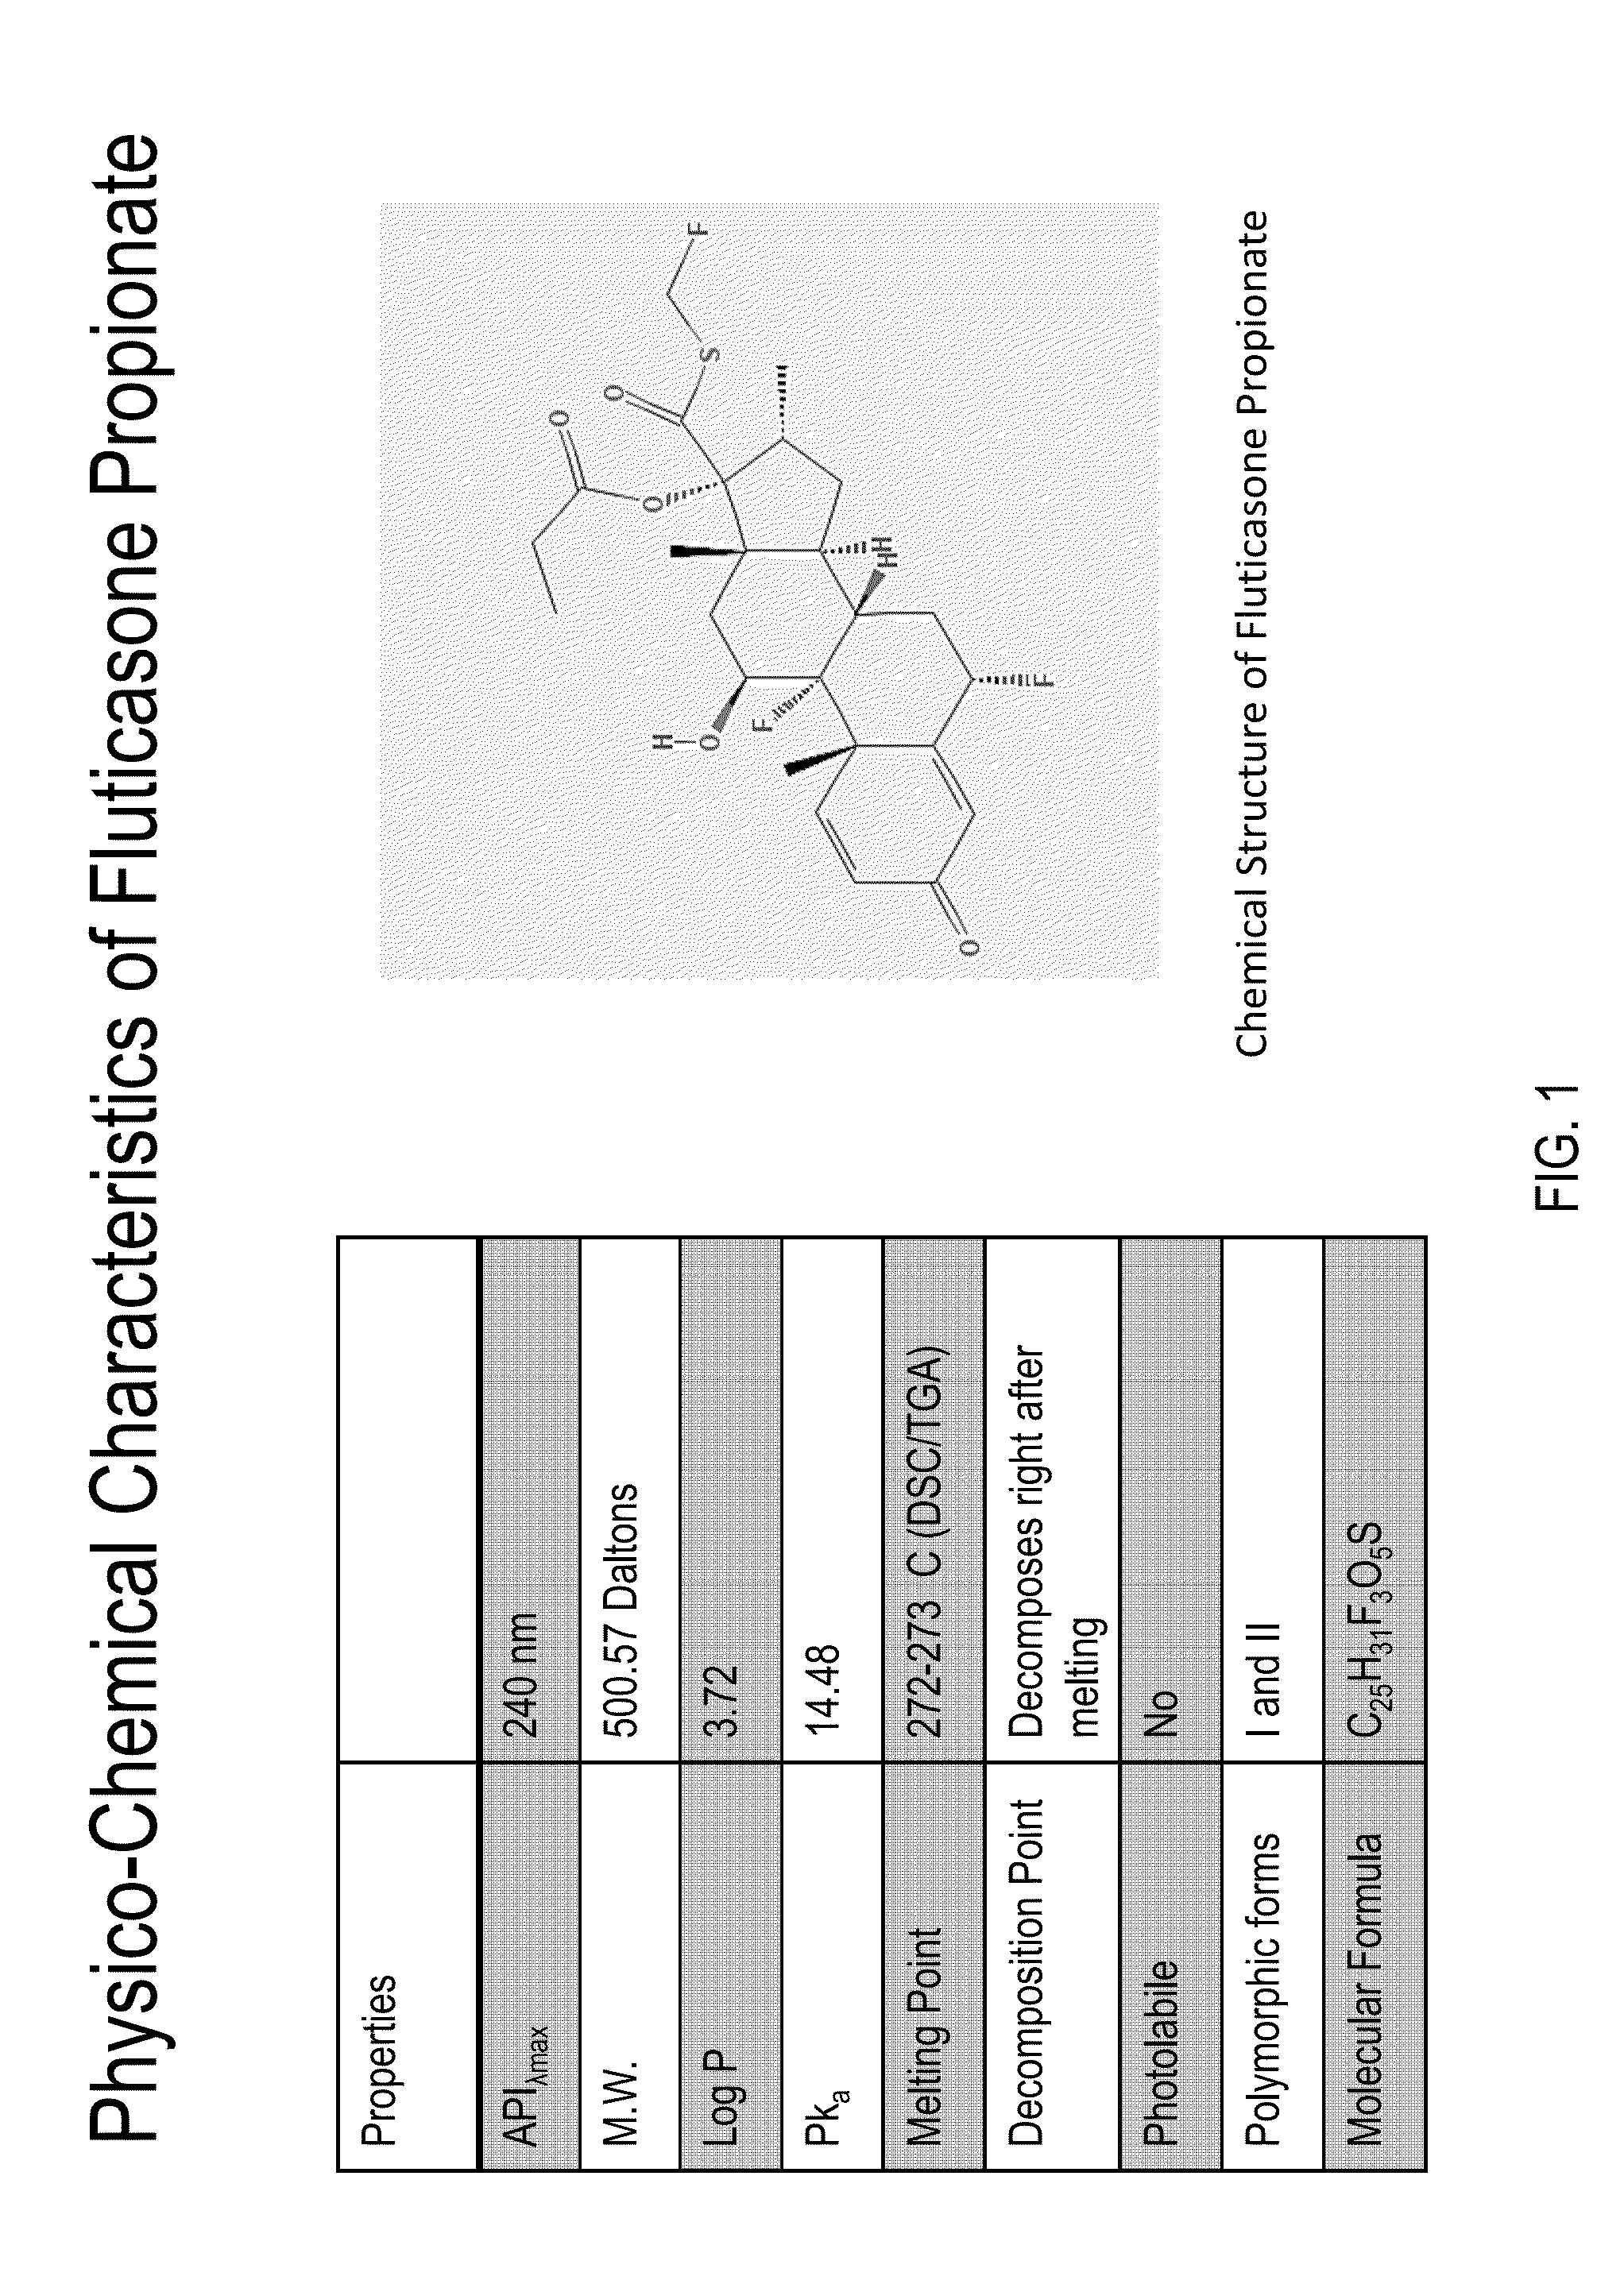 Preparations of Hydrophobic Therapeutic Agents, Methods of Manufacture and Use Thereof